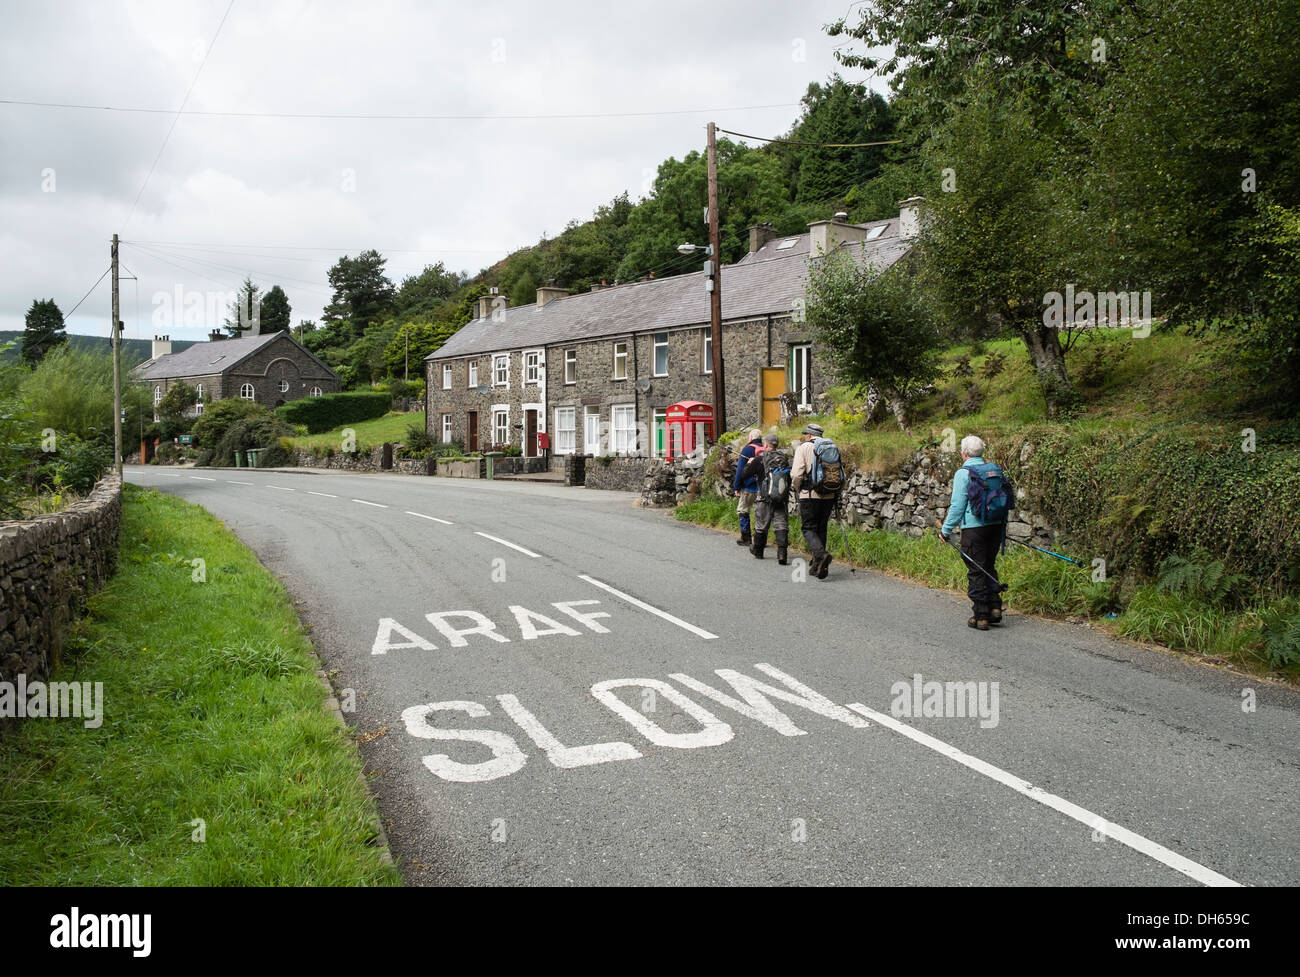 Welsh and English bilingual Araf Slow sign painted on main road with walkers walking through village. Betws Garmon Gwynedd Wales Stock Photo